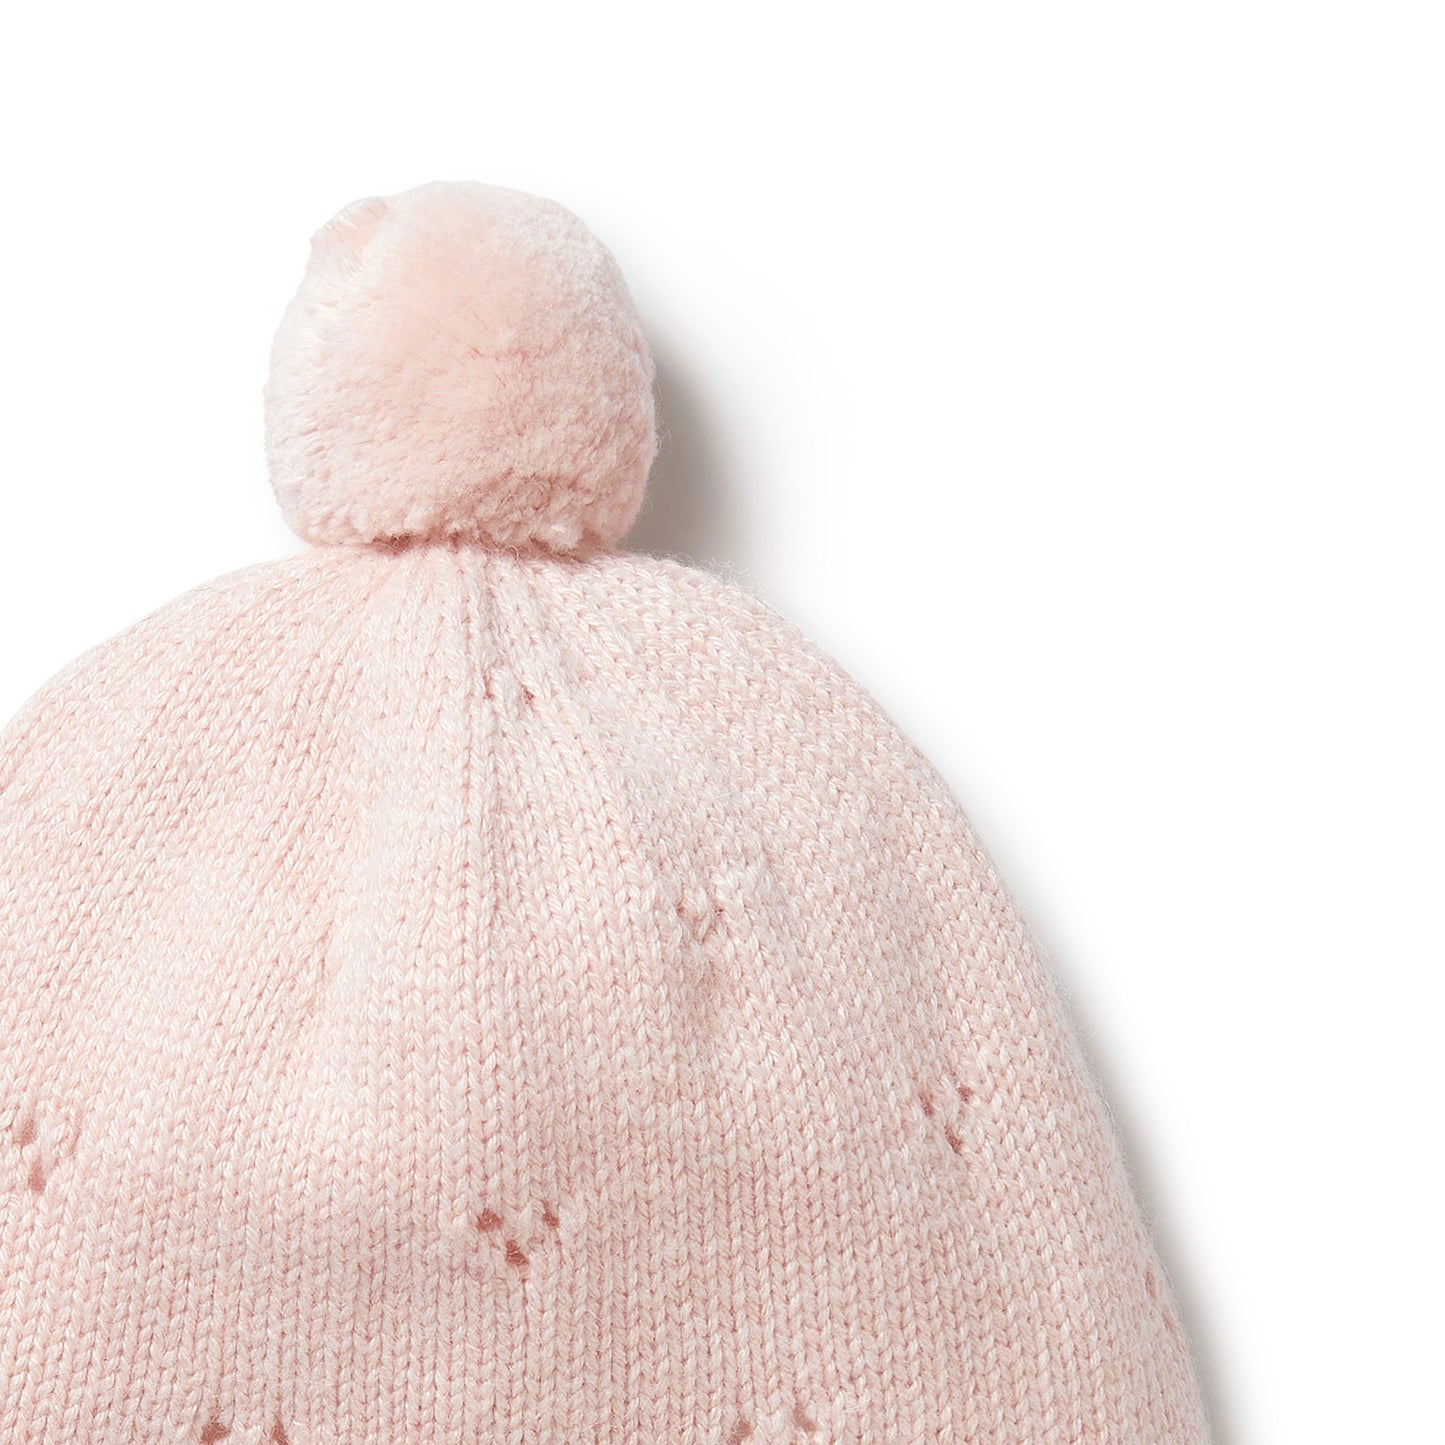 KNITTED POINTLLE BONNET - PINK